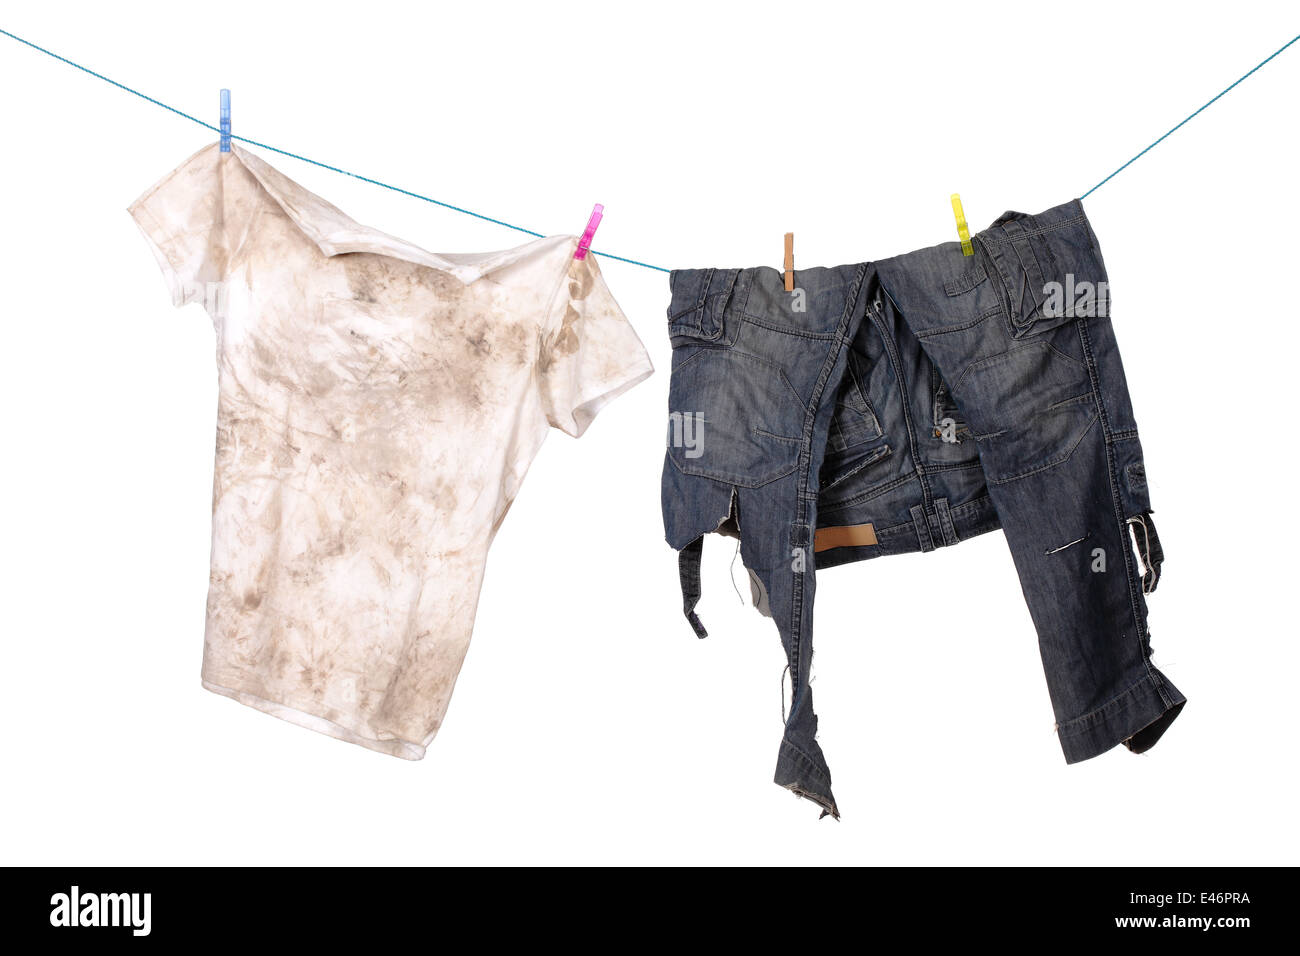 dirty shirt and trousers hanging to dry Stock Photo - Alamy